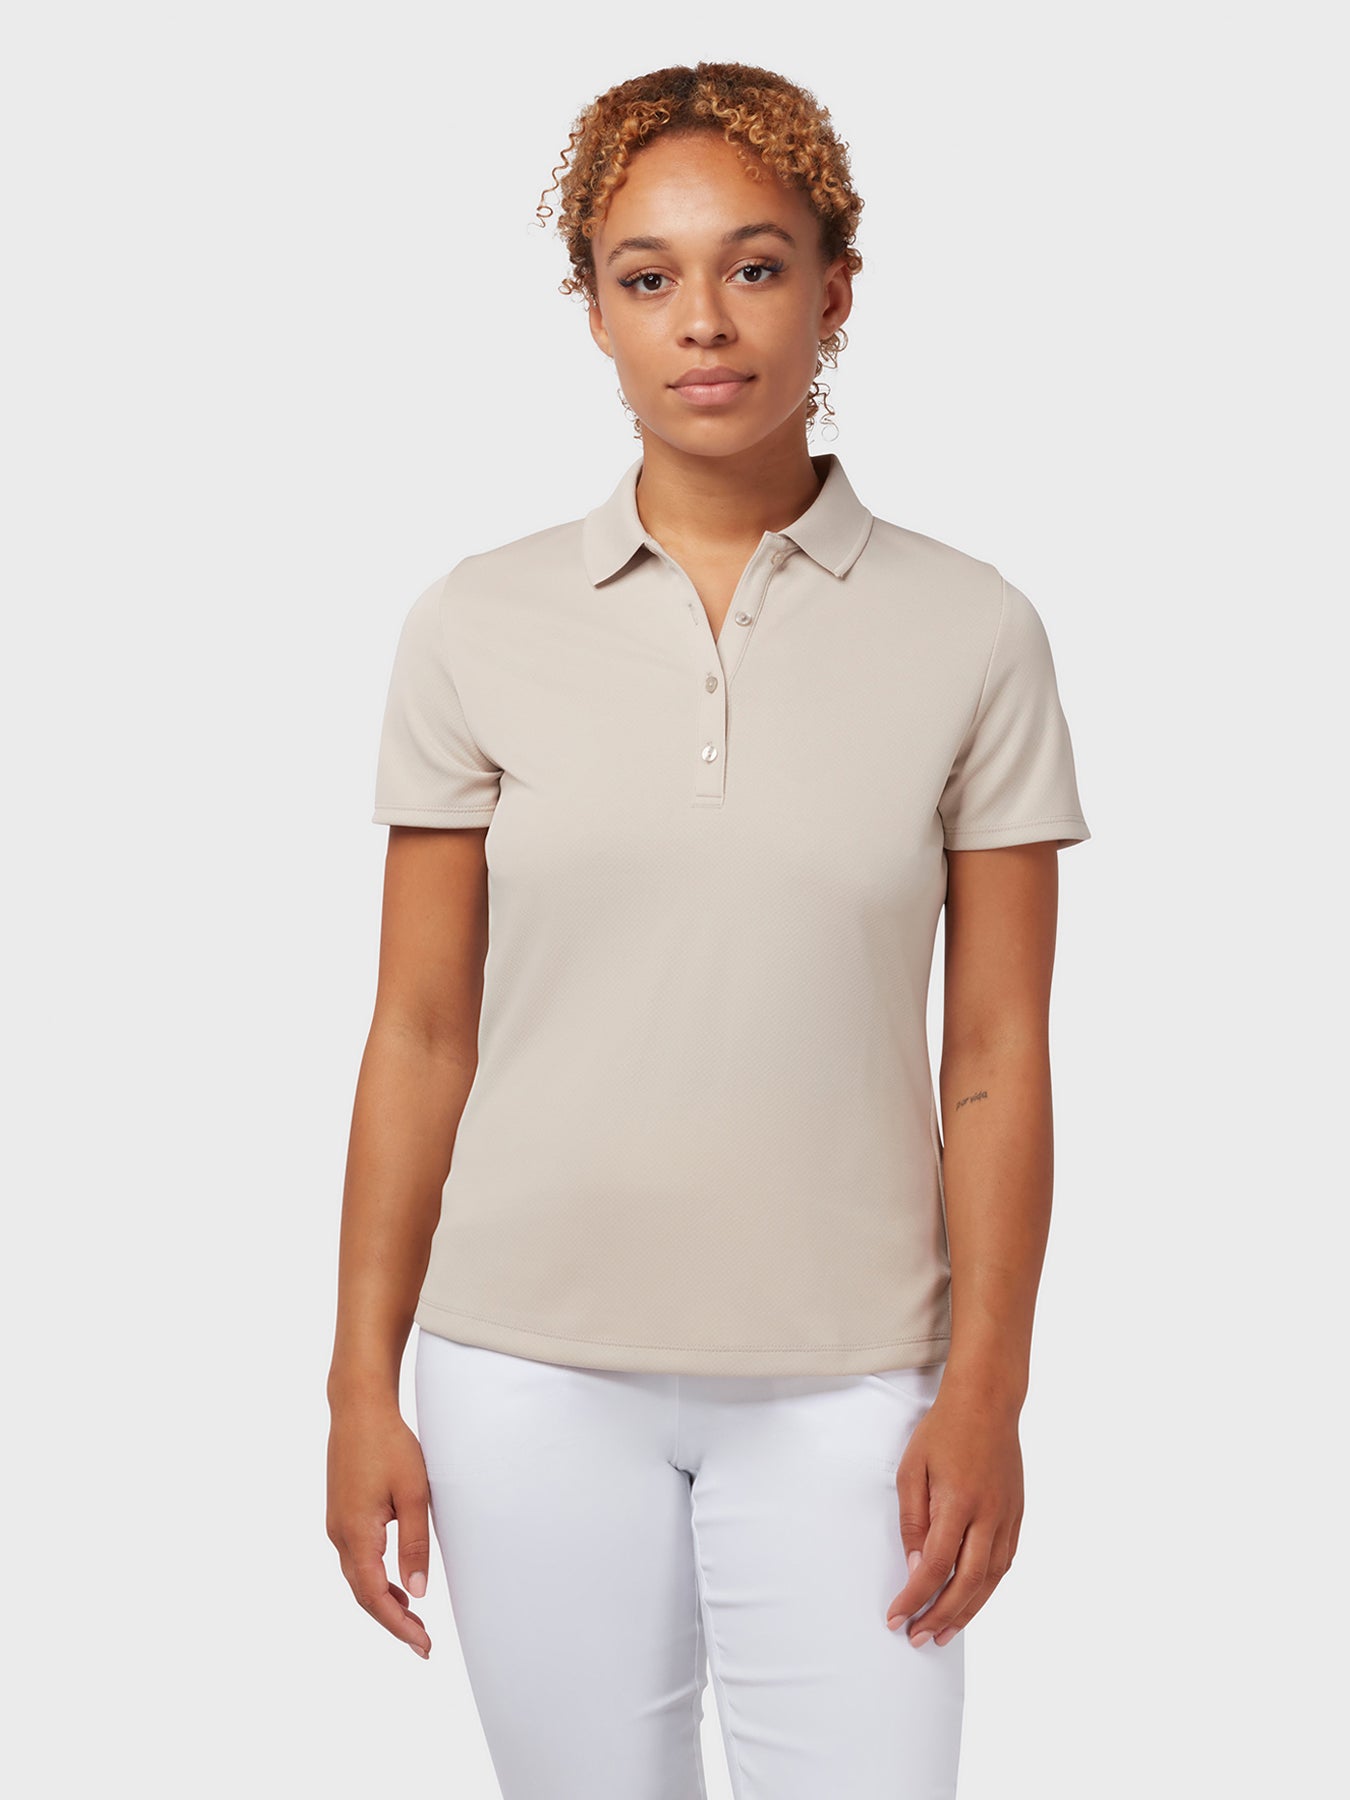 View Swing Tech Womens Polo In Chateau Grey Chateau Grey XXL information